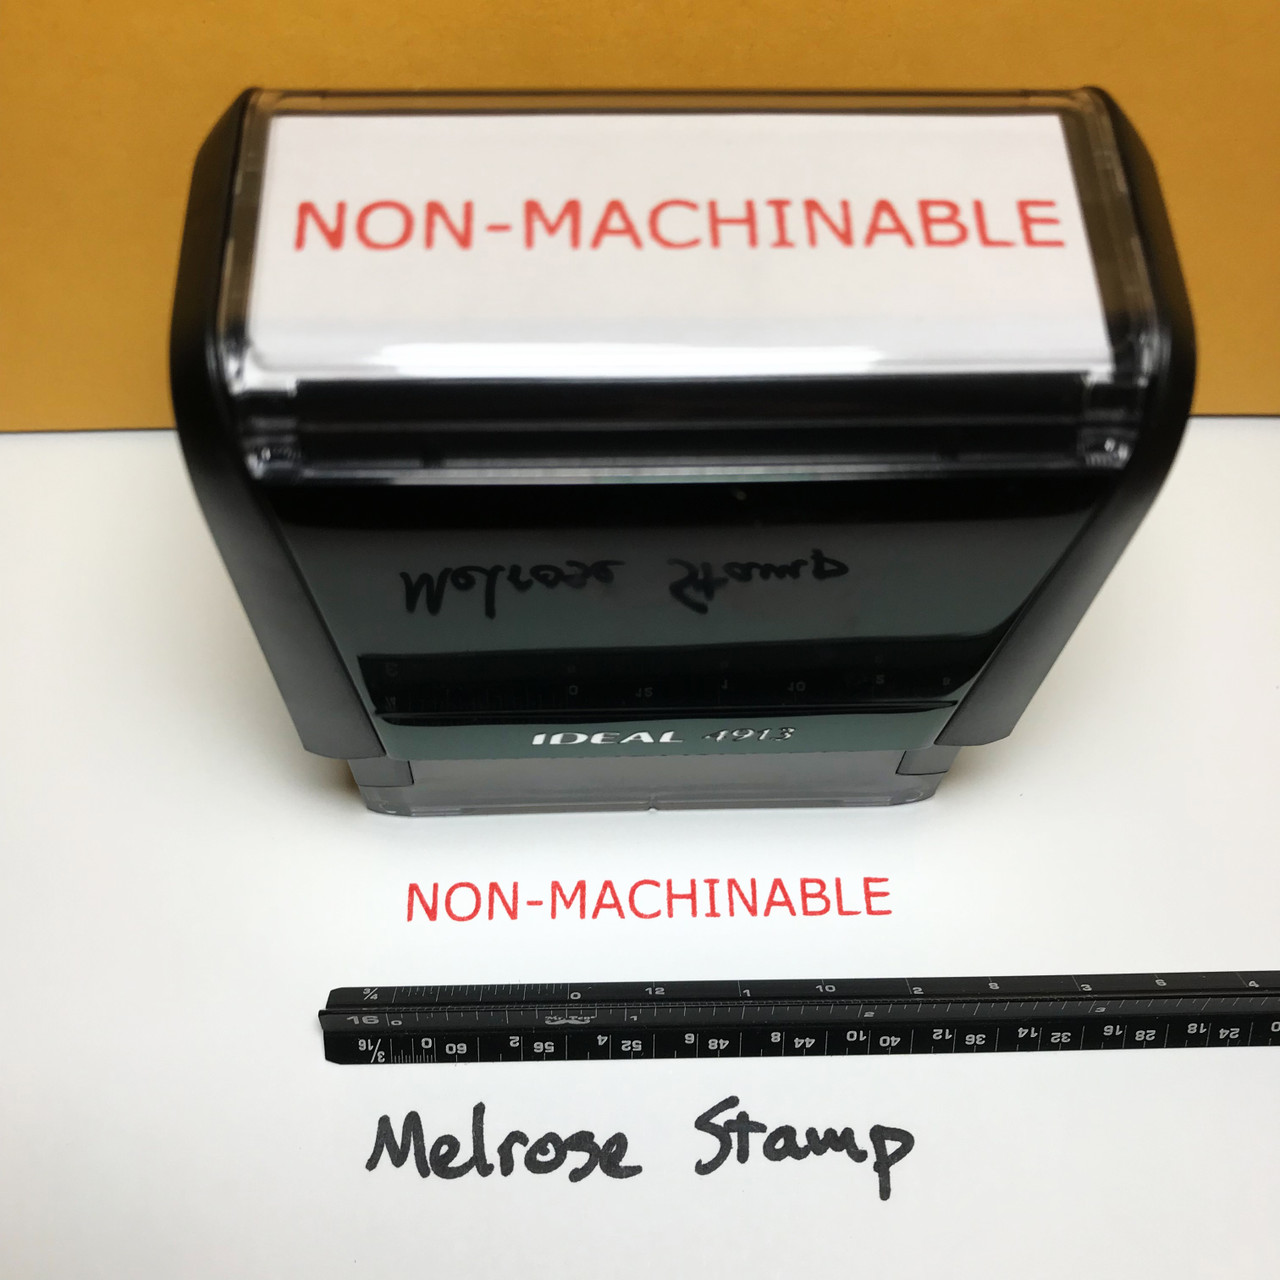 NONMACHINABLE Rubber Stamp for mail use selfinking Melrose Stamp